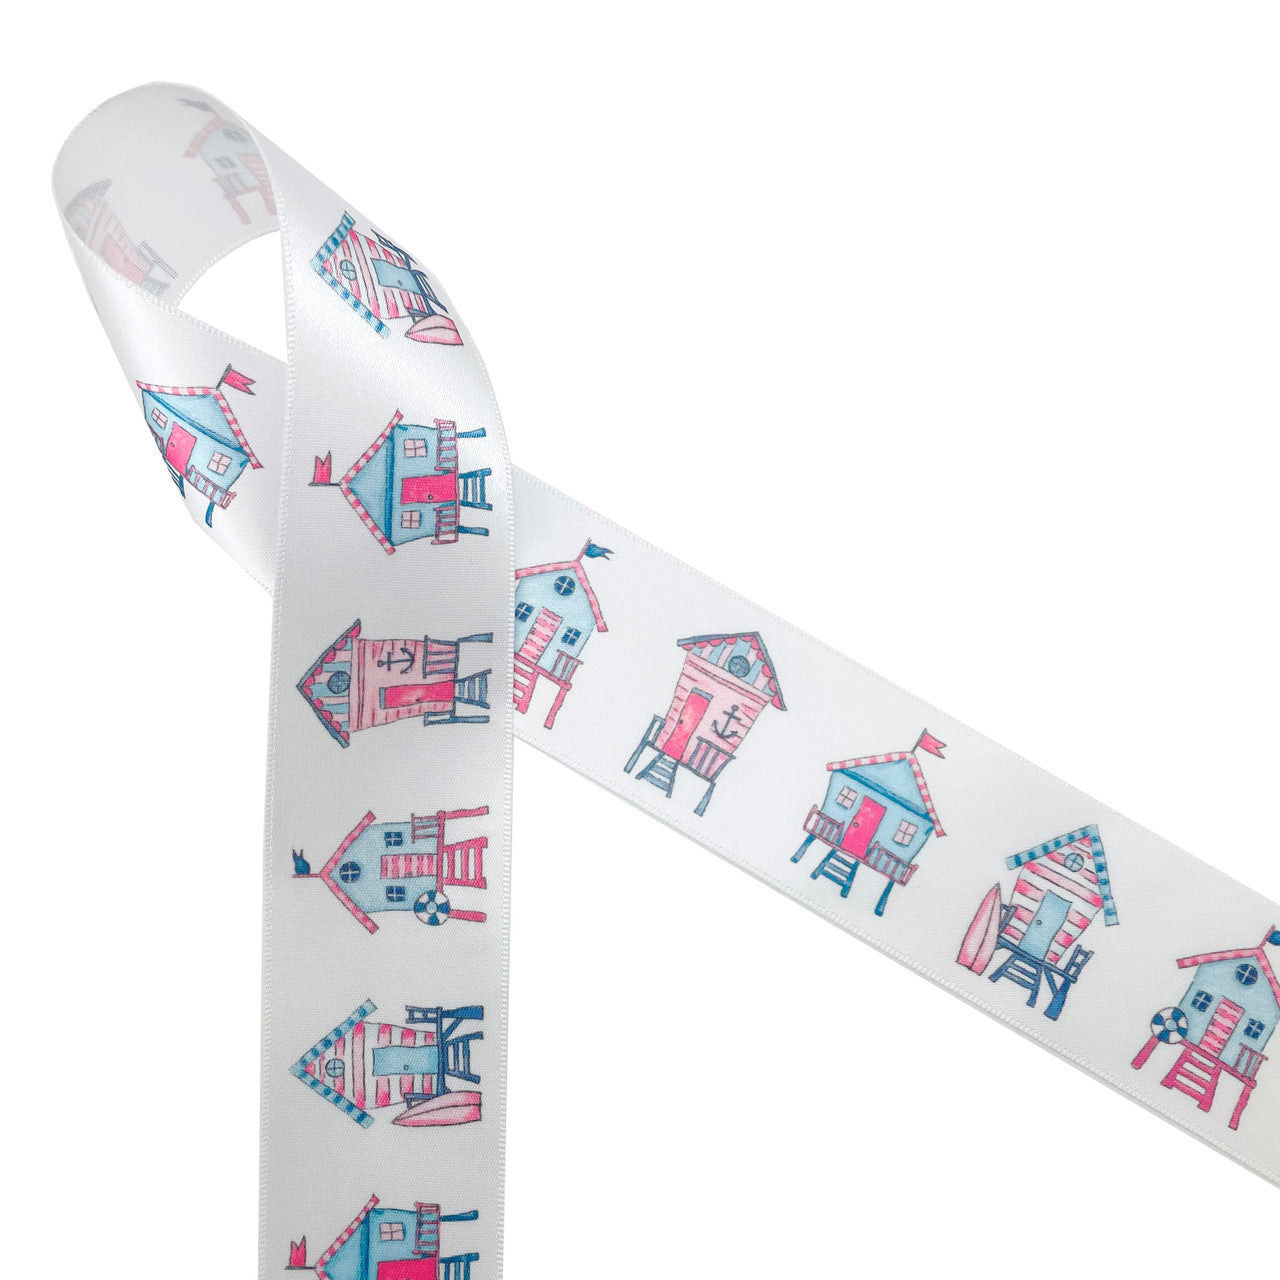 Beach shacks in red white and blue printed on  1.5" white single face satin ribbon is such a fun Summer ribbon! Use this ribbon for gift wrap, gift baskets, party decor, Fourth of July celebrations, crafts, sewing projects and quilting. This is a fun ribbon for beach themed parties all Summer long! All our ribbon is designed and printed in the USA